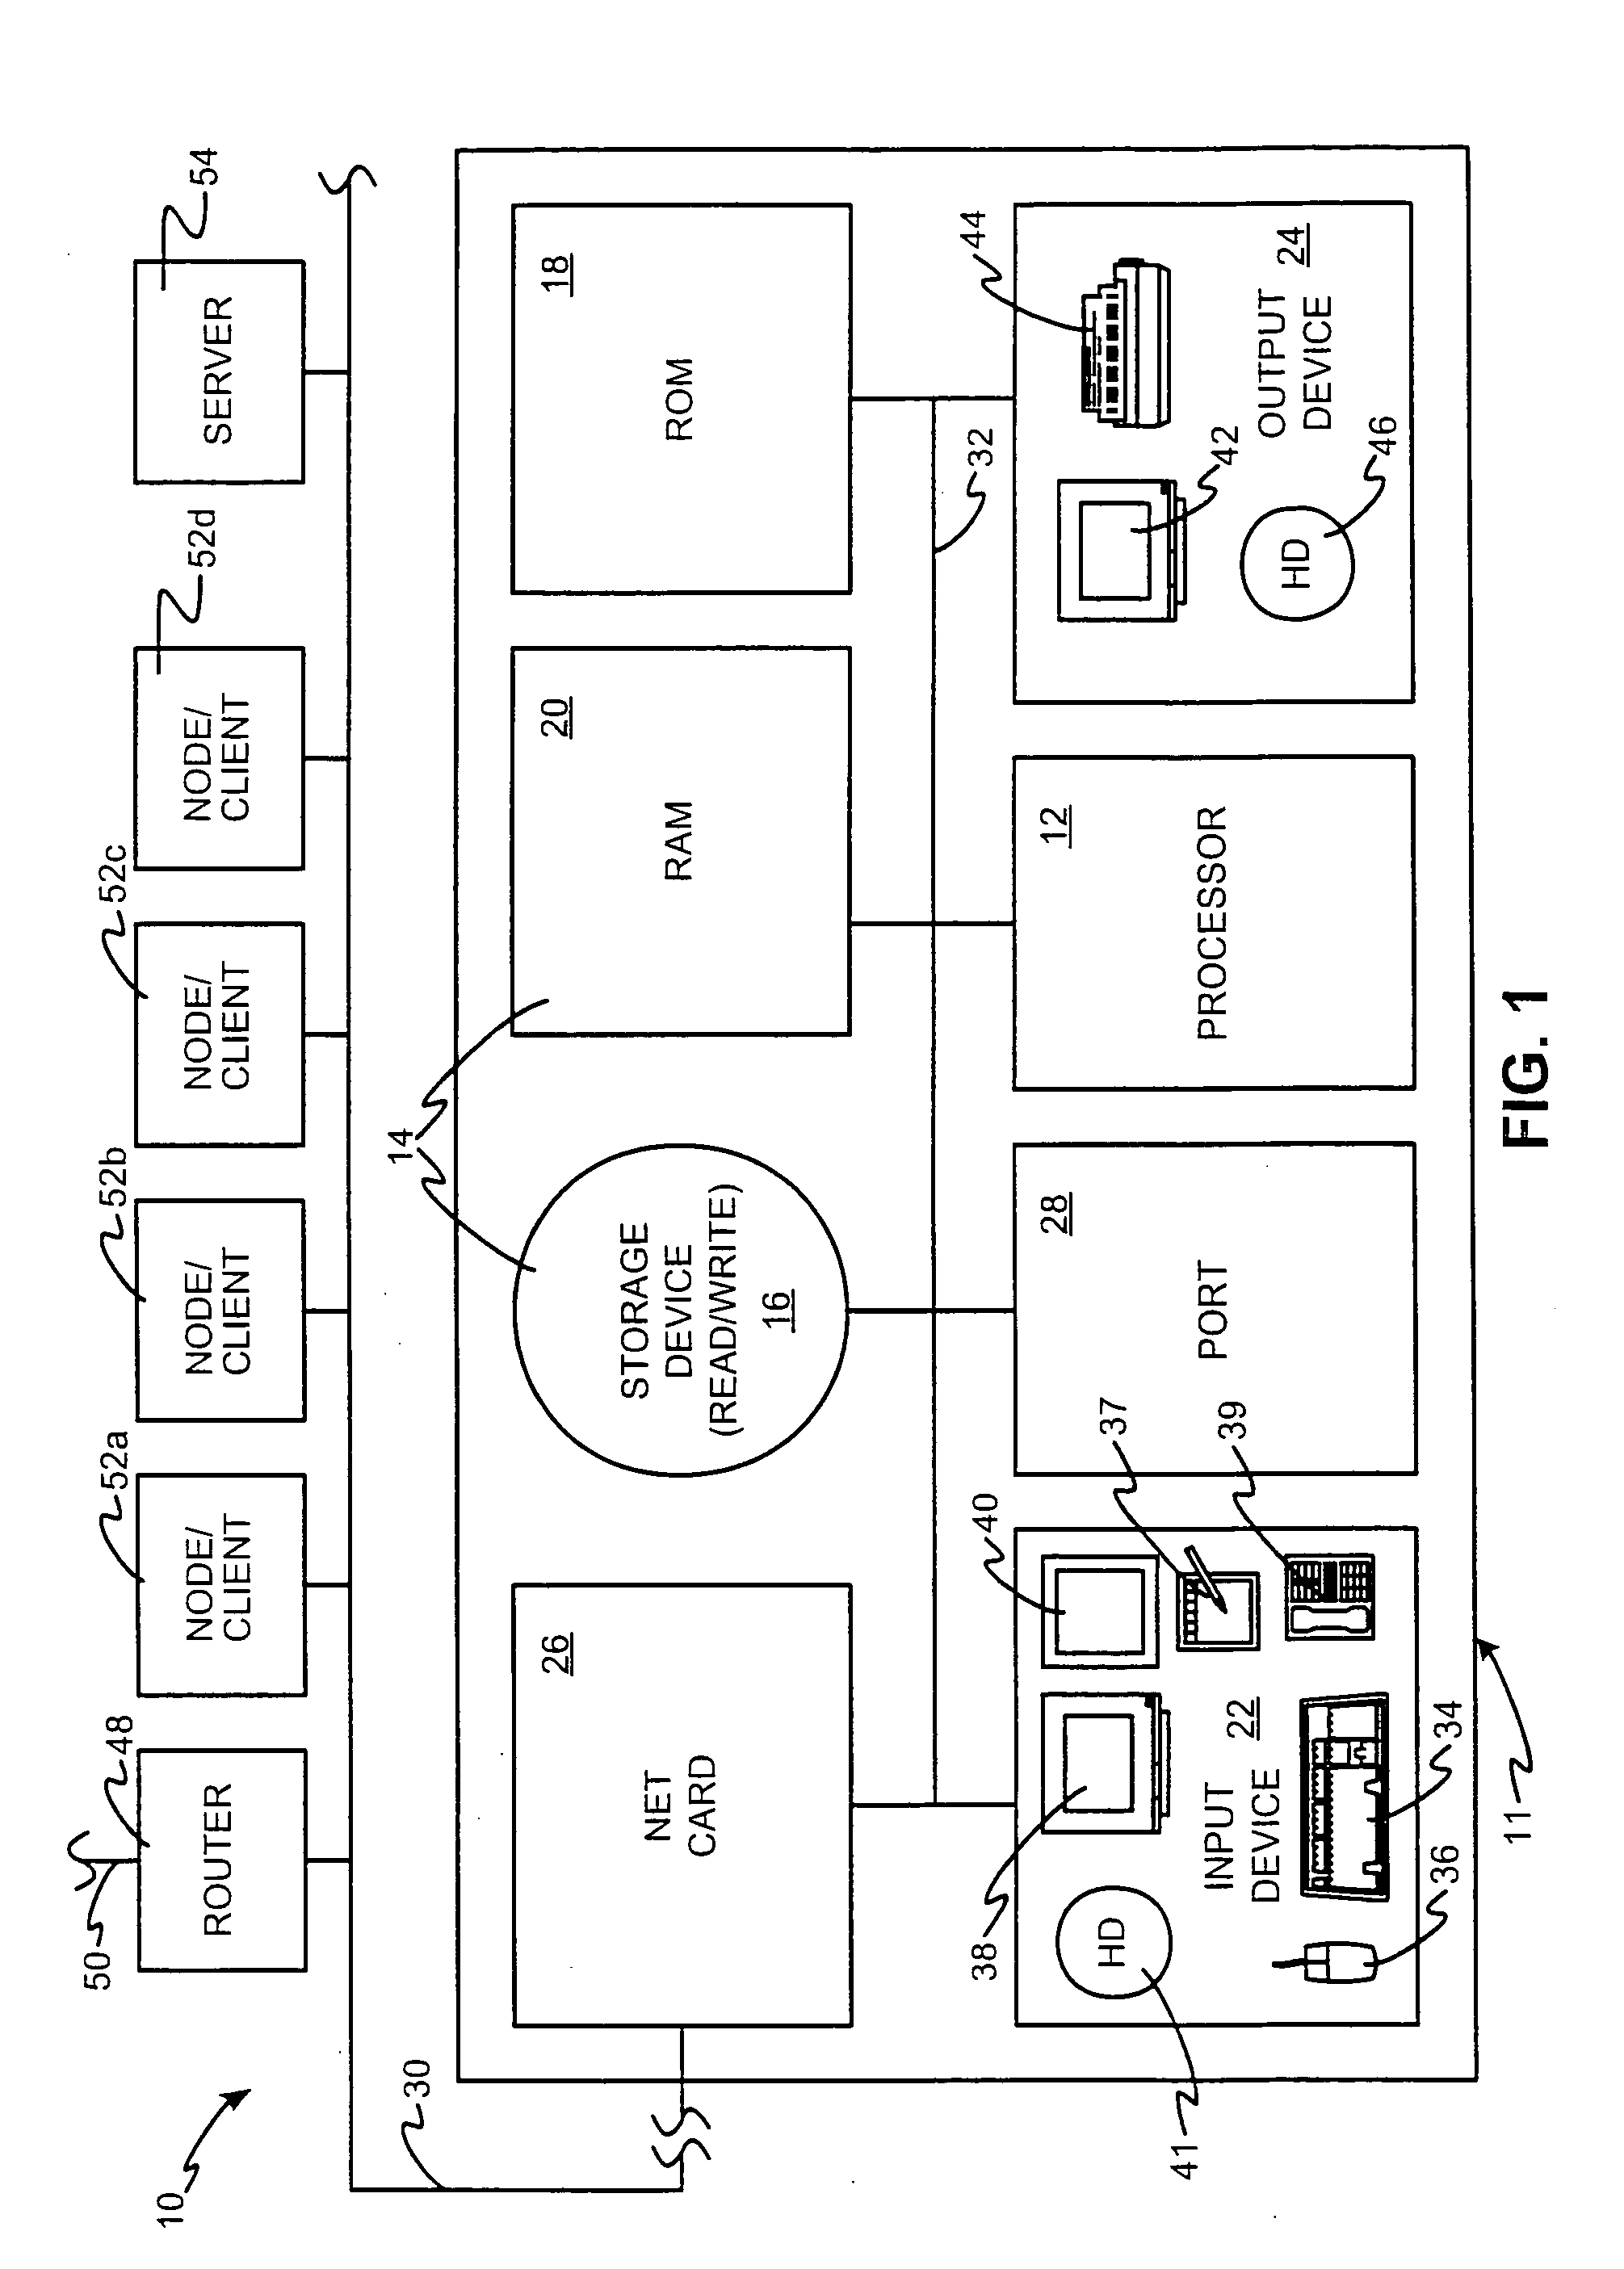 Computerized employee evaluation processing apparatus and method